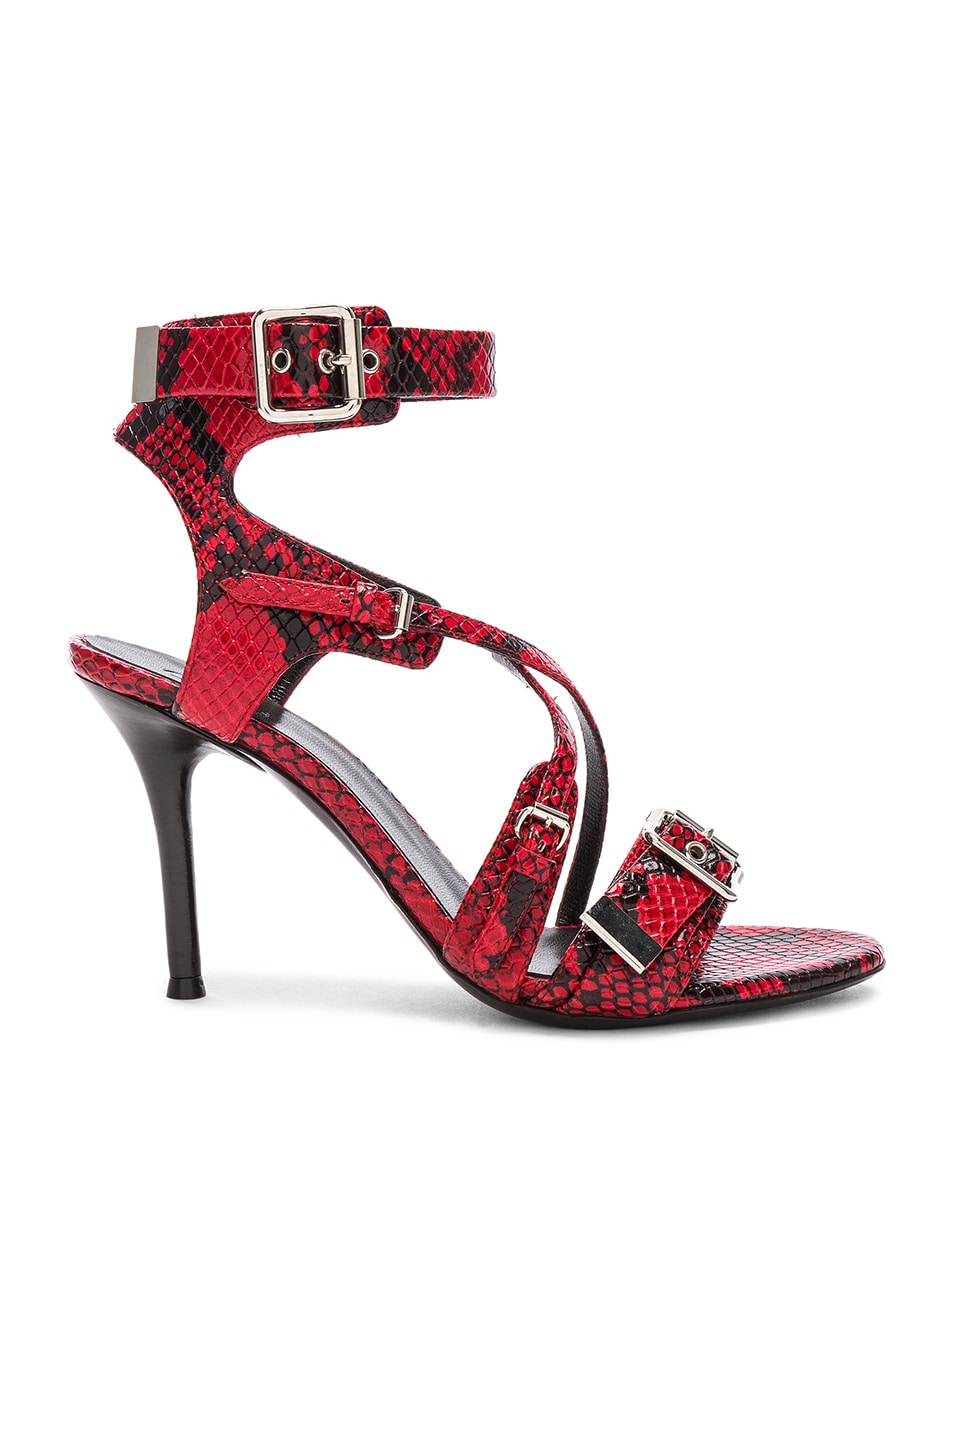 Image 1 of Chloe Scott Python Print Leather Ankle Strap Sandals in Gypsy Red